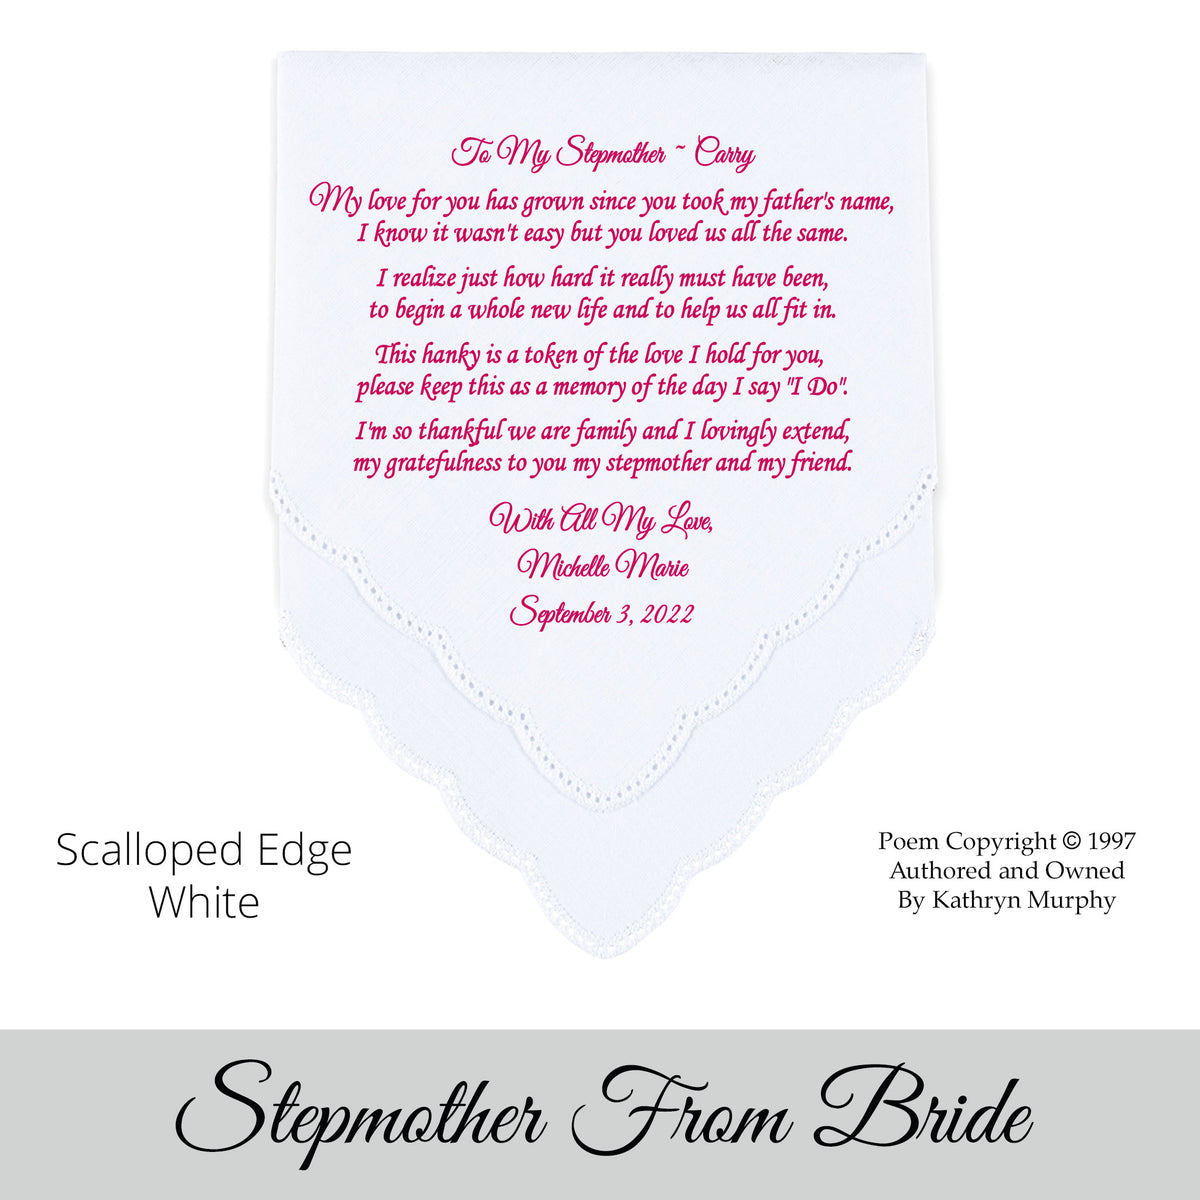 gift for the stepmother of the bride. Wedding Hankie with printed poem